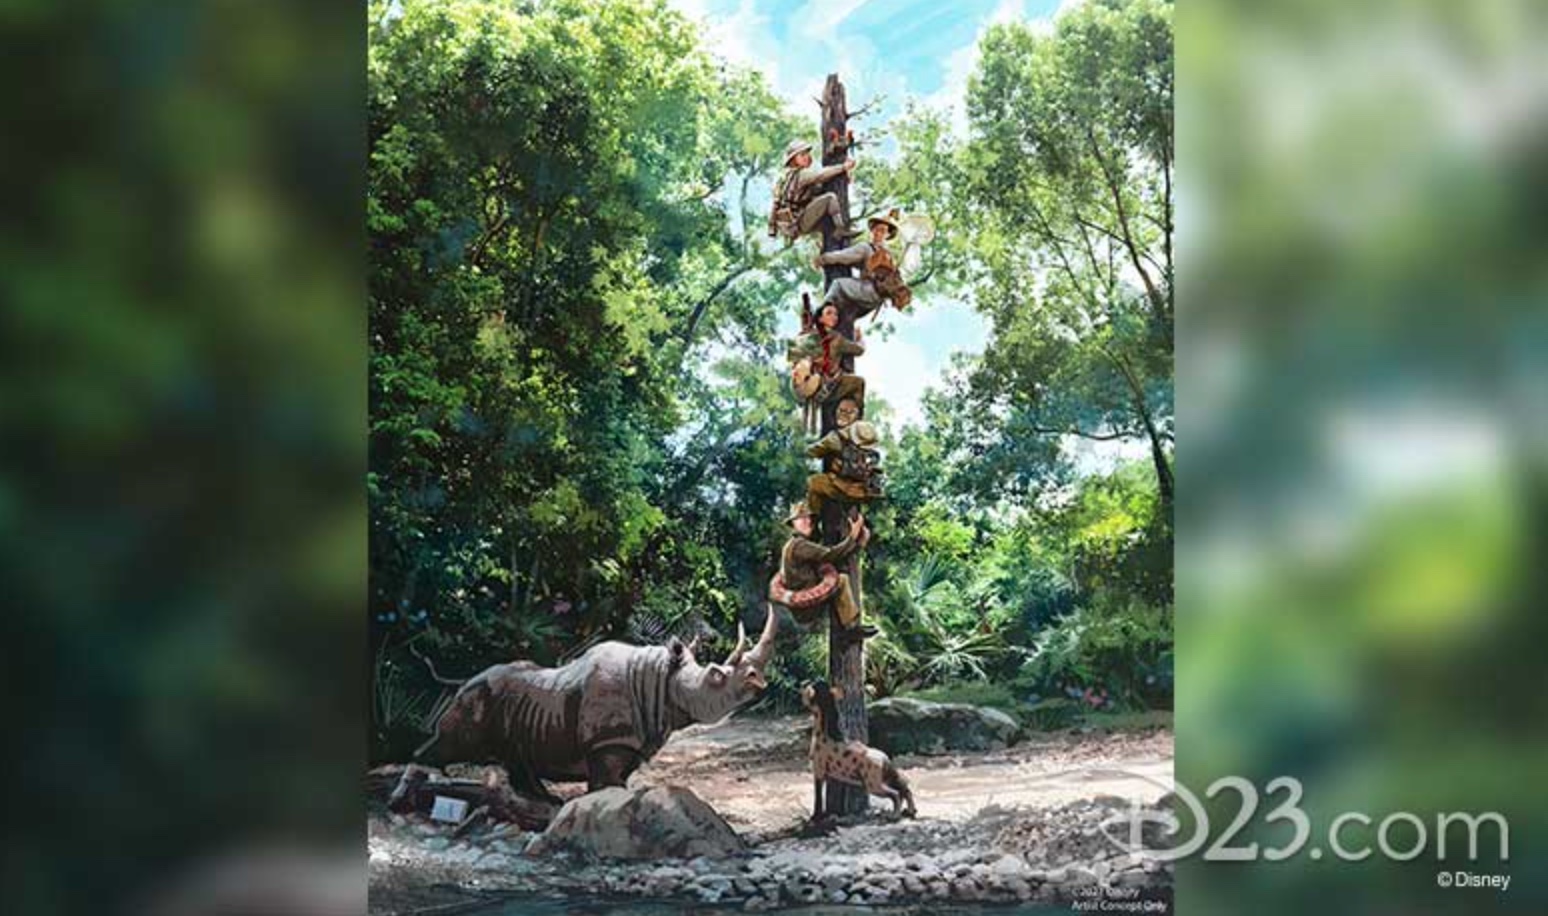 Concept art from the updated Jungle Cruise. (Image: D23.com)